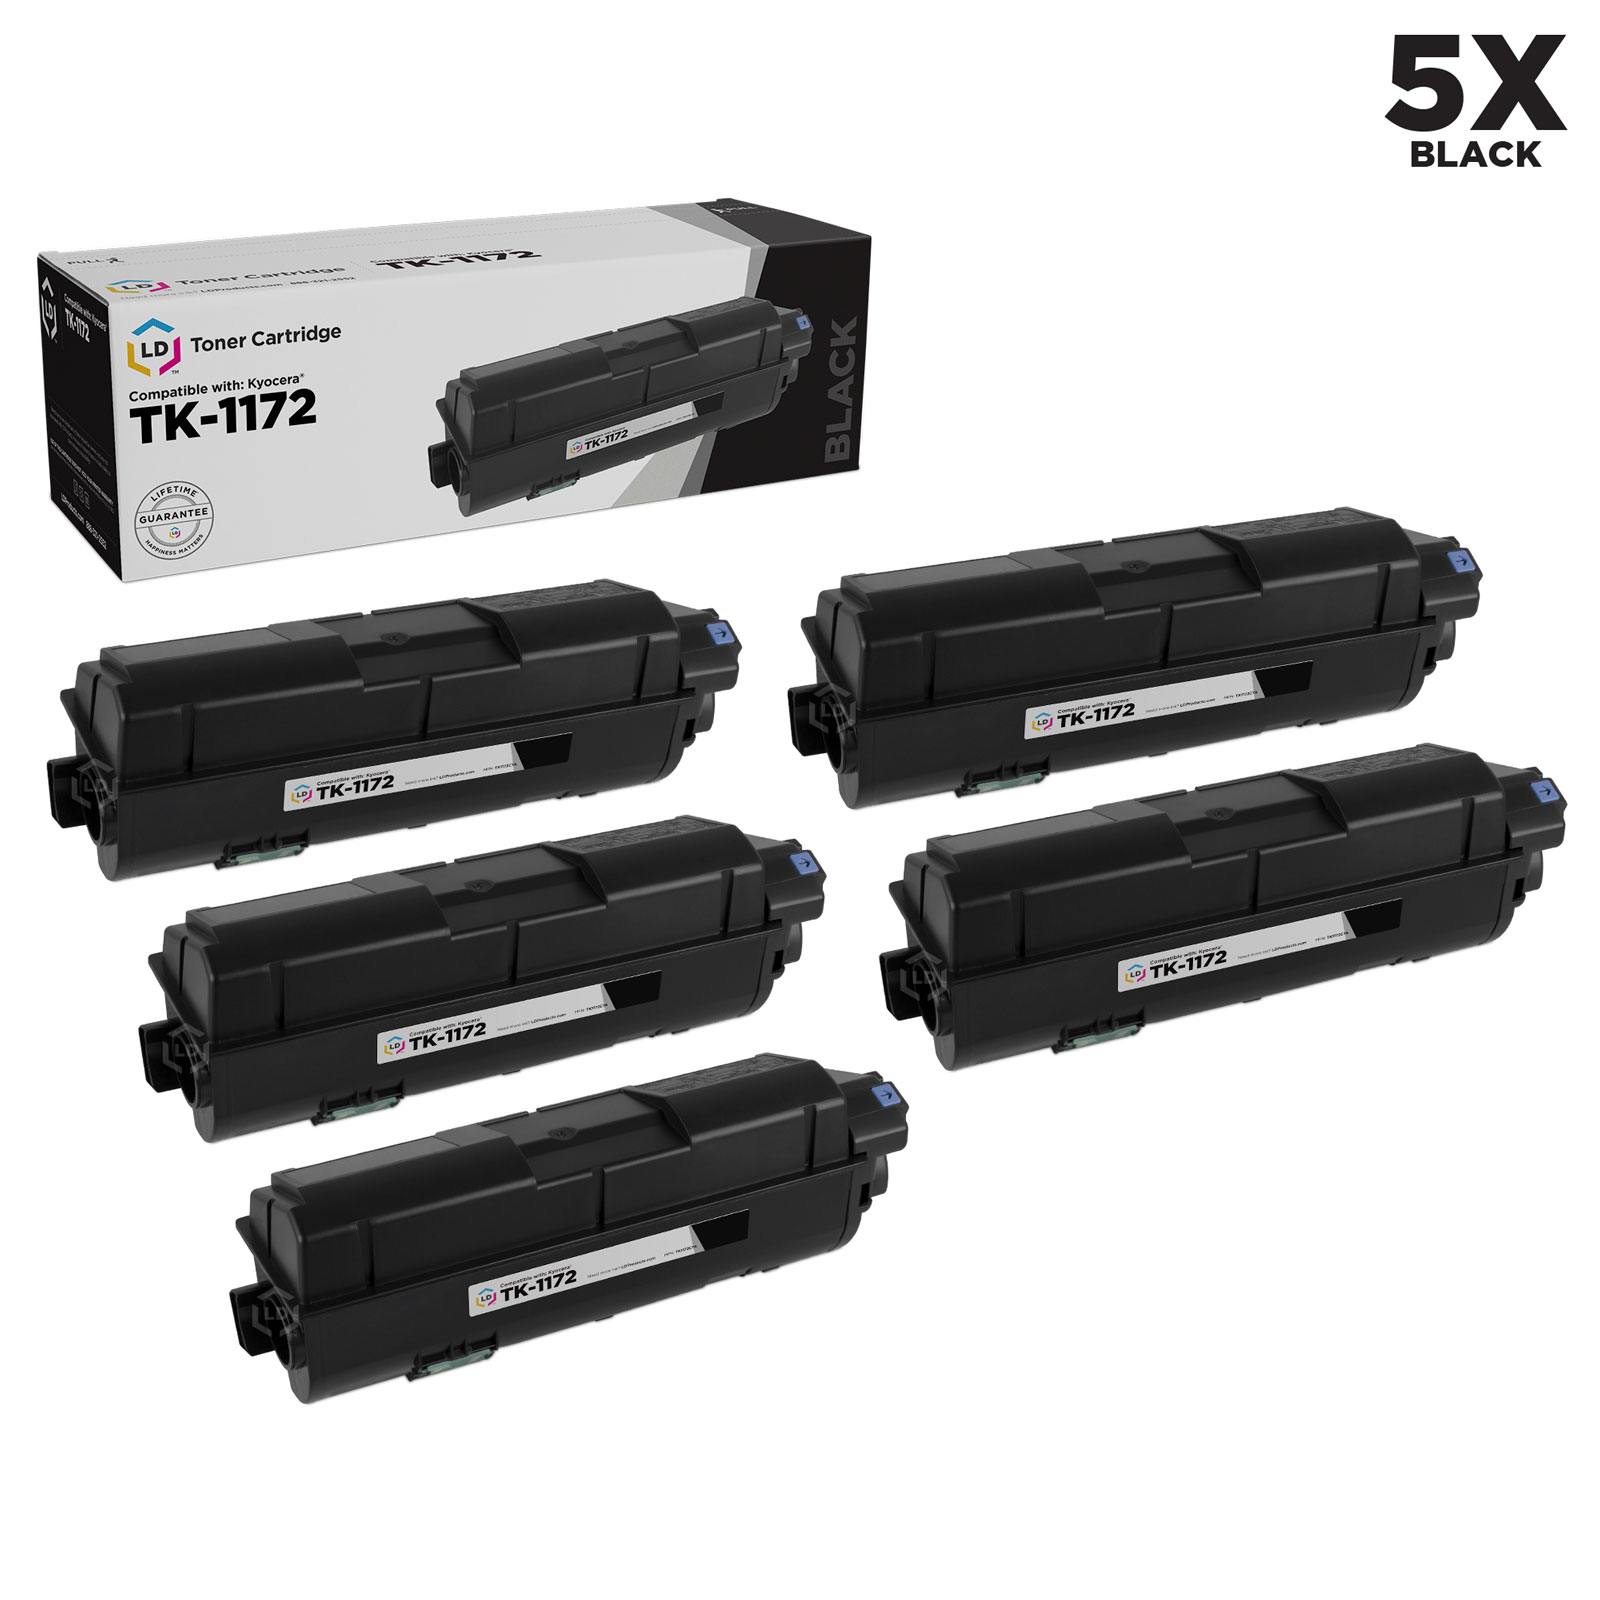 LD Compatible Replacement for Kyocera TK-1172 (1T02S50US0) Pack of 5 Black Laser Toner Cartridges for use in M2040dn, M2540d, M2540dw & M2640idw - image 1 of 2